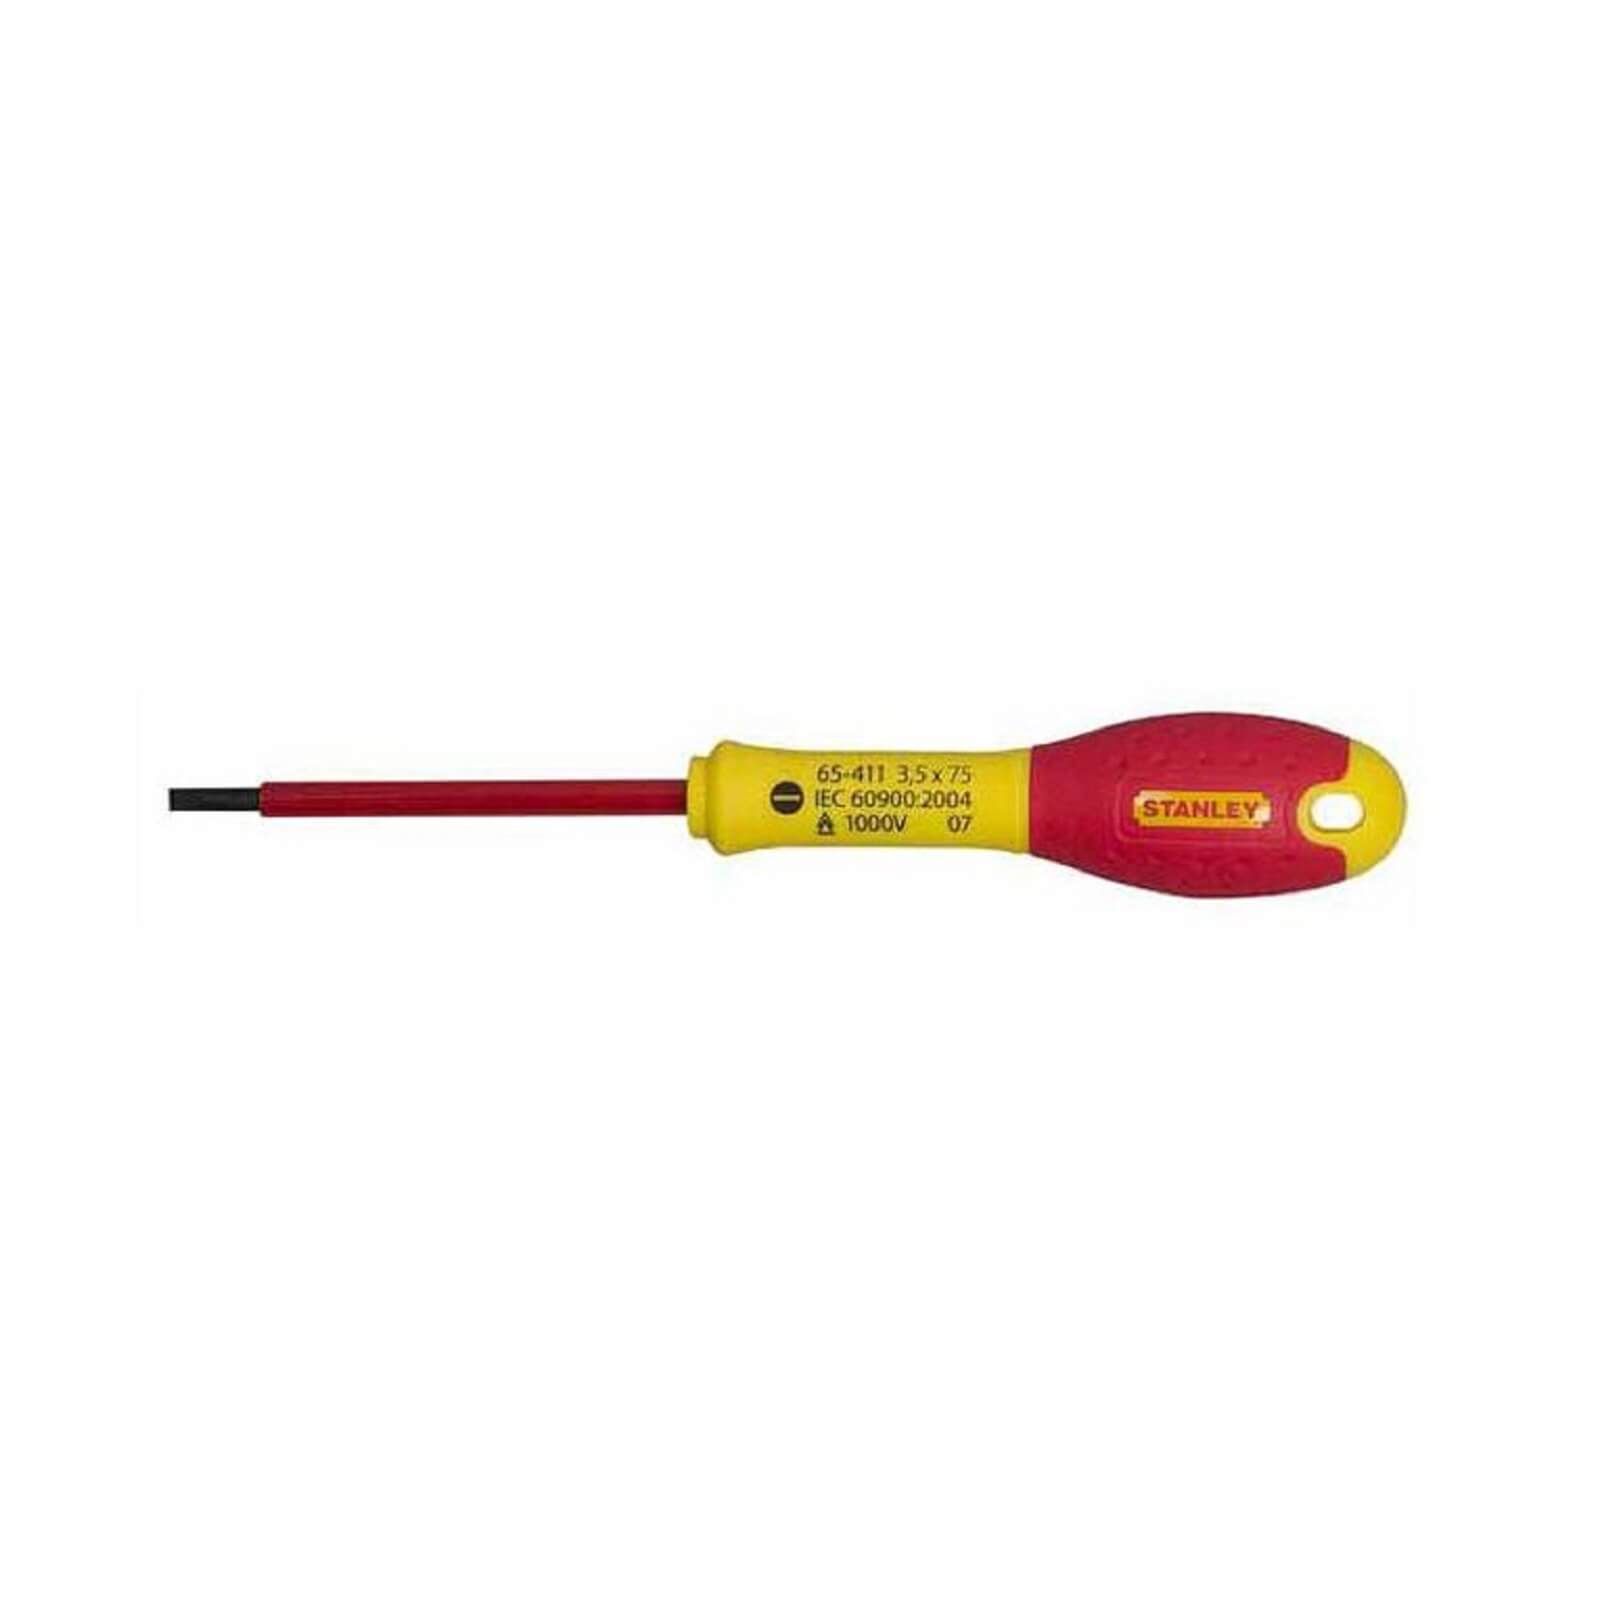 Photo of Stanley Fatmax Slotted Insulated Screwdriver - 4x100mm